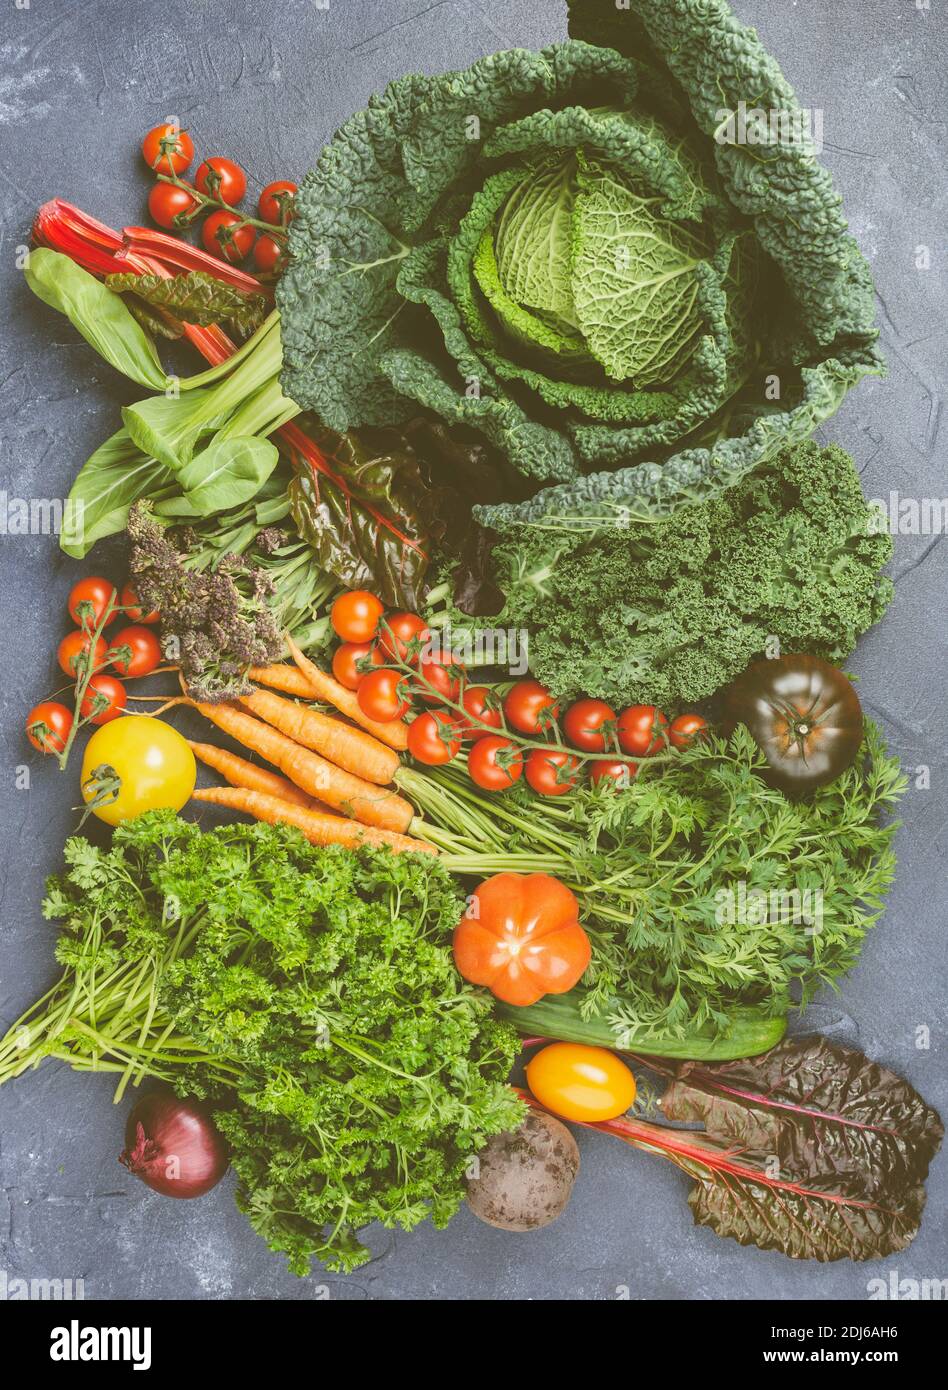 Variety of organic vegetables on blue table Stock Photo